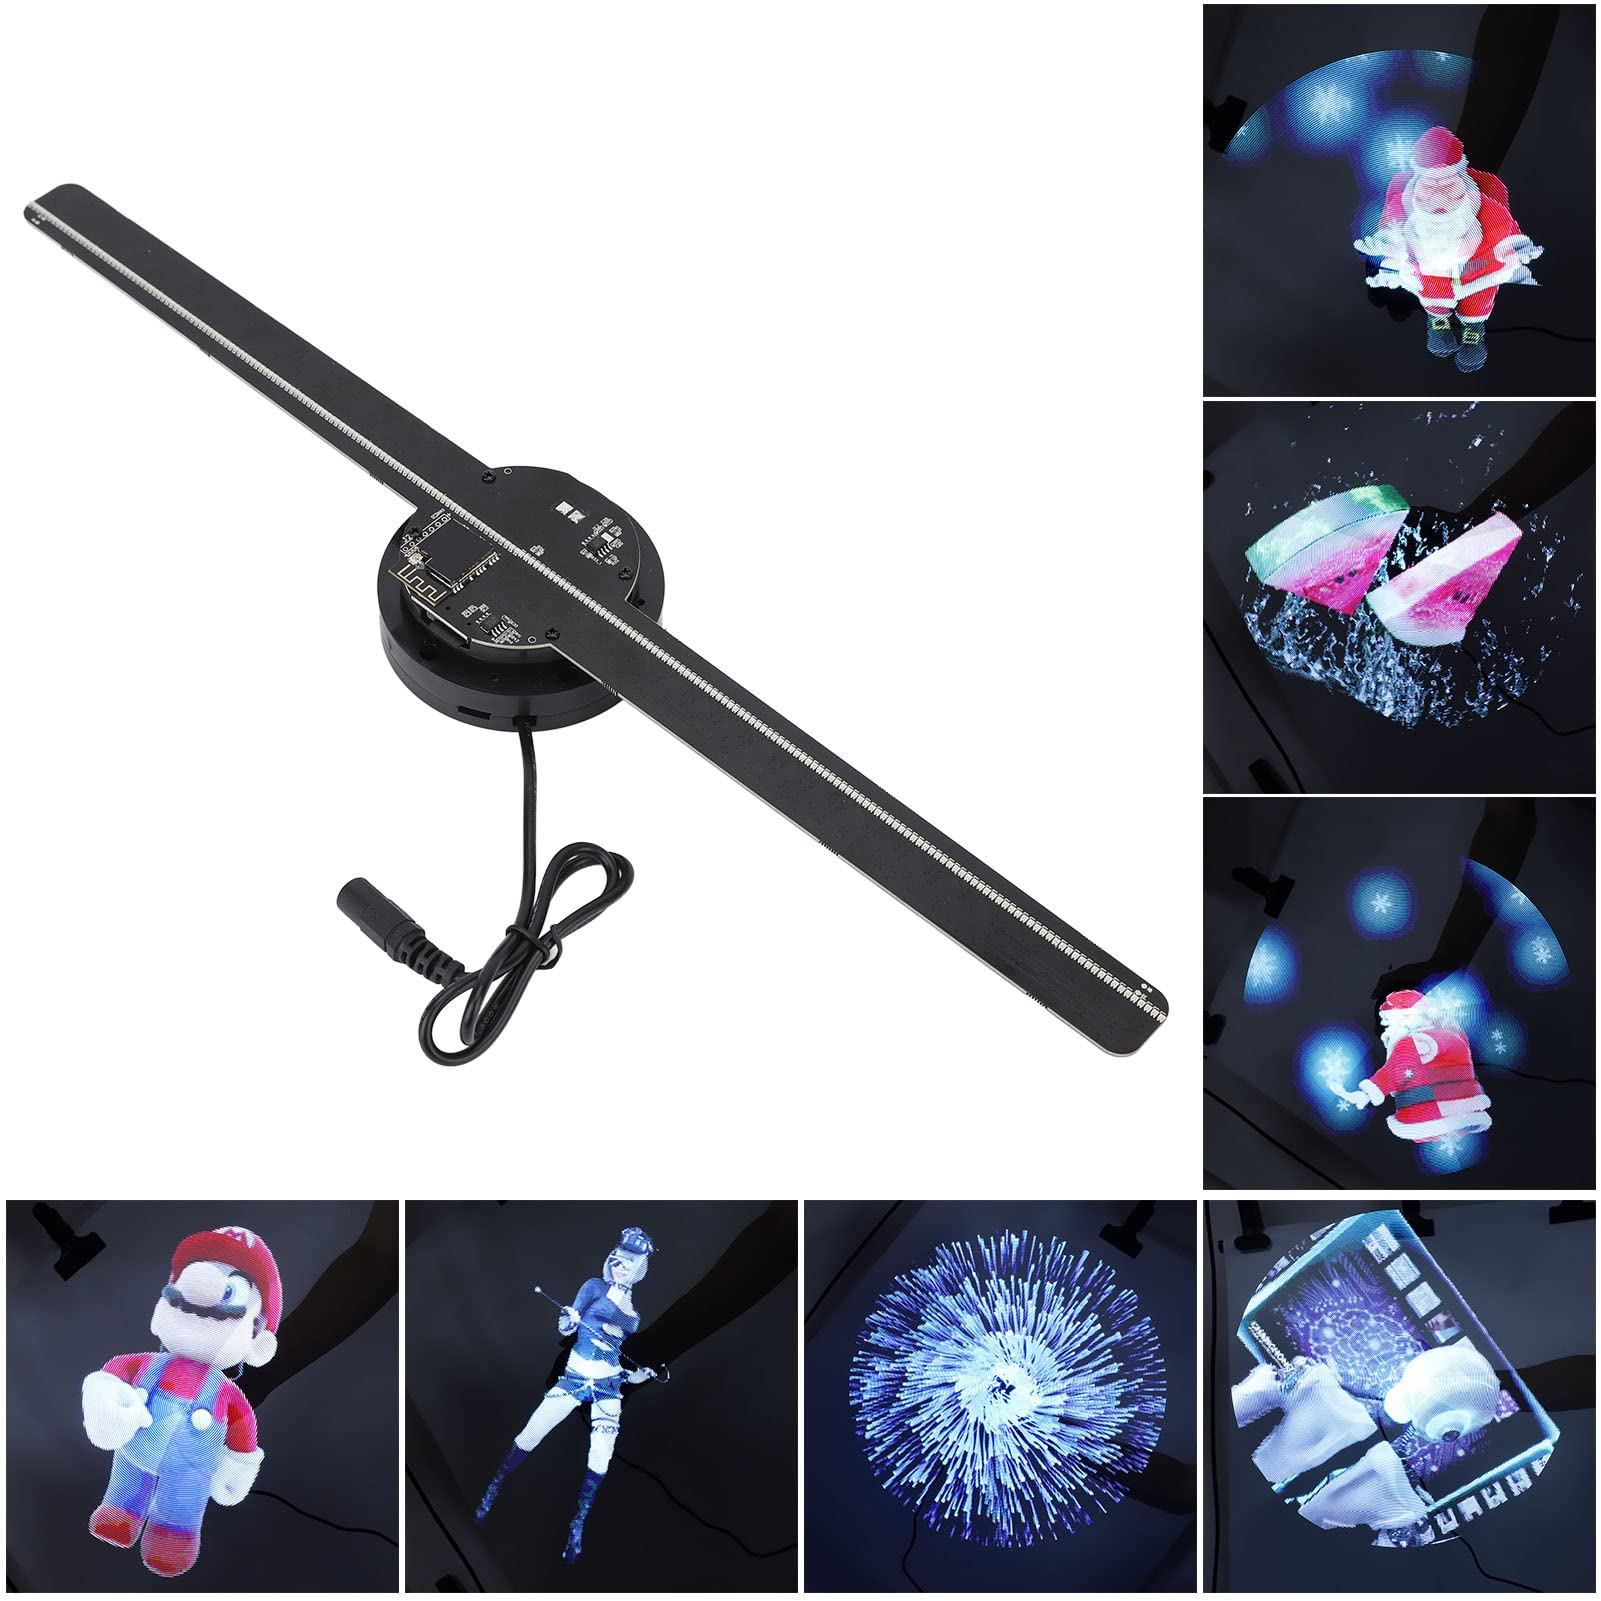 3D Hologram Fan, 3D Advertising Player, 16.5 Inch 480P HD 3D Hologram Projector Advertising Display, 3D Wifi Holographic Projector Fan with 224 LED Light Beads for Business Store Shop Bar(#1)